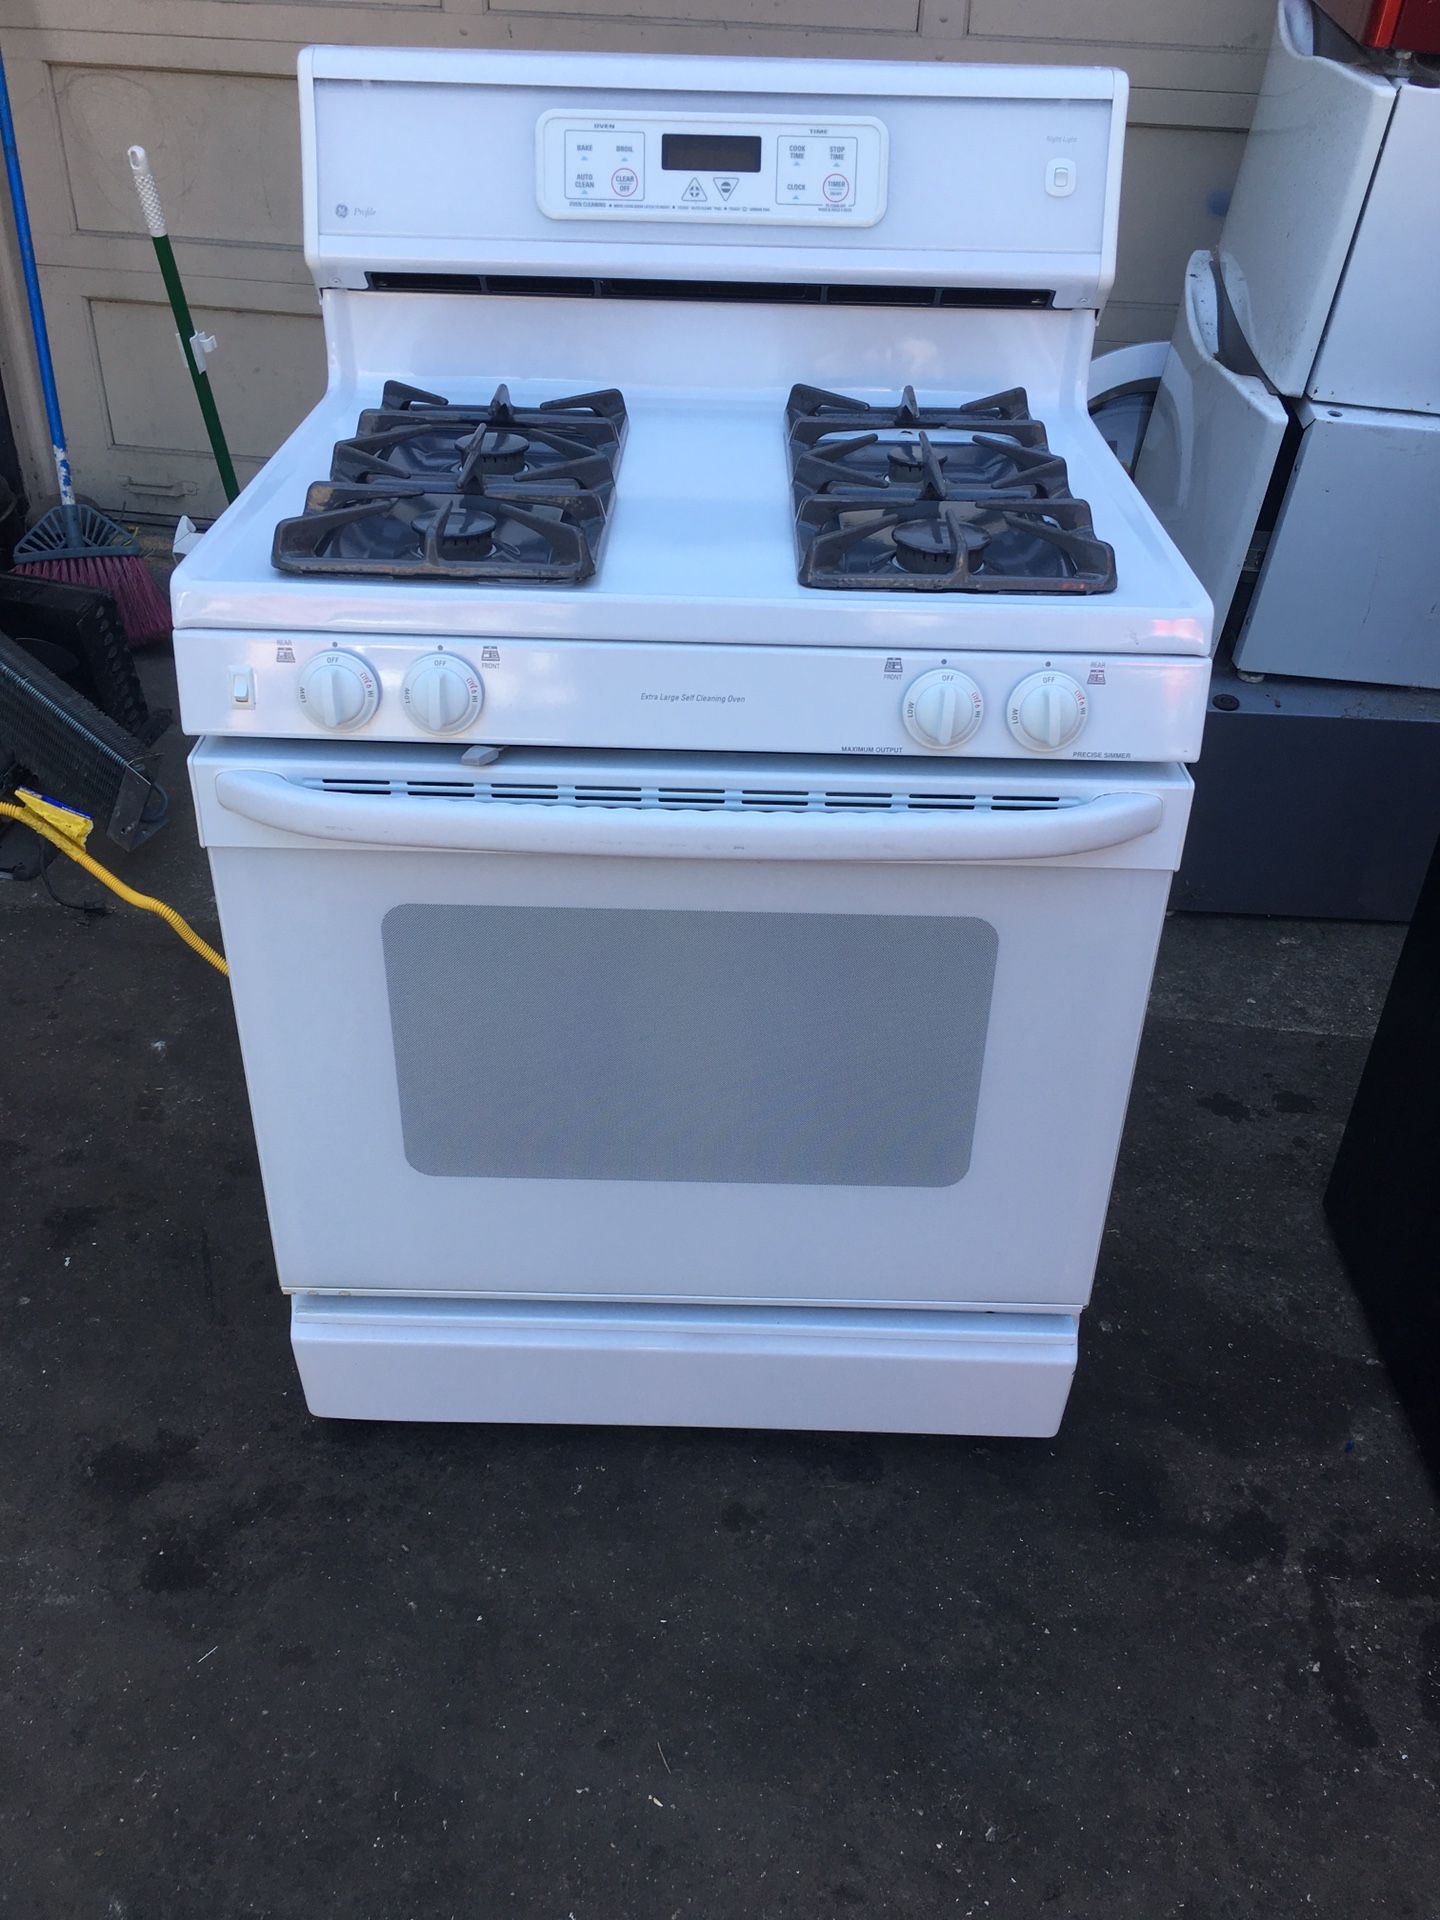 Stove gas brand GE everything is good working condition 90 days warranty